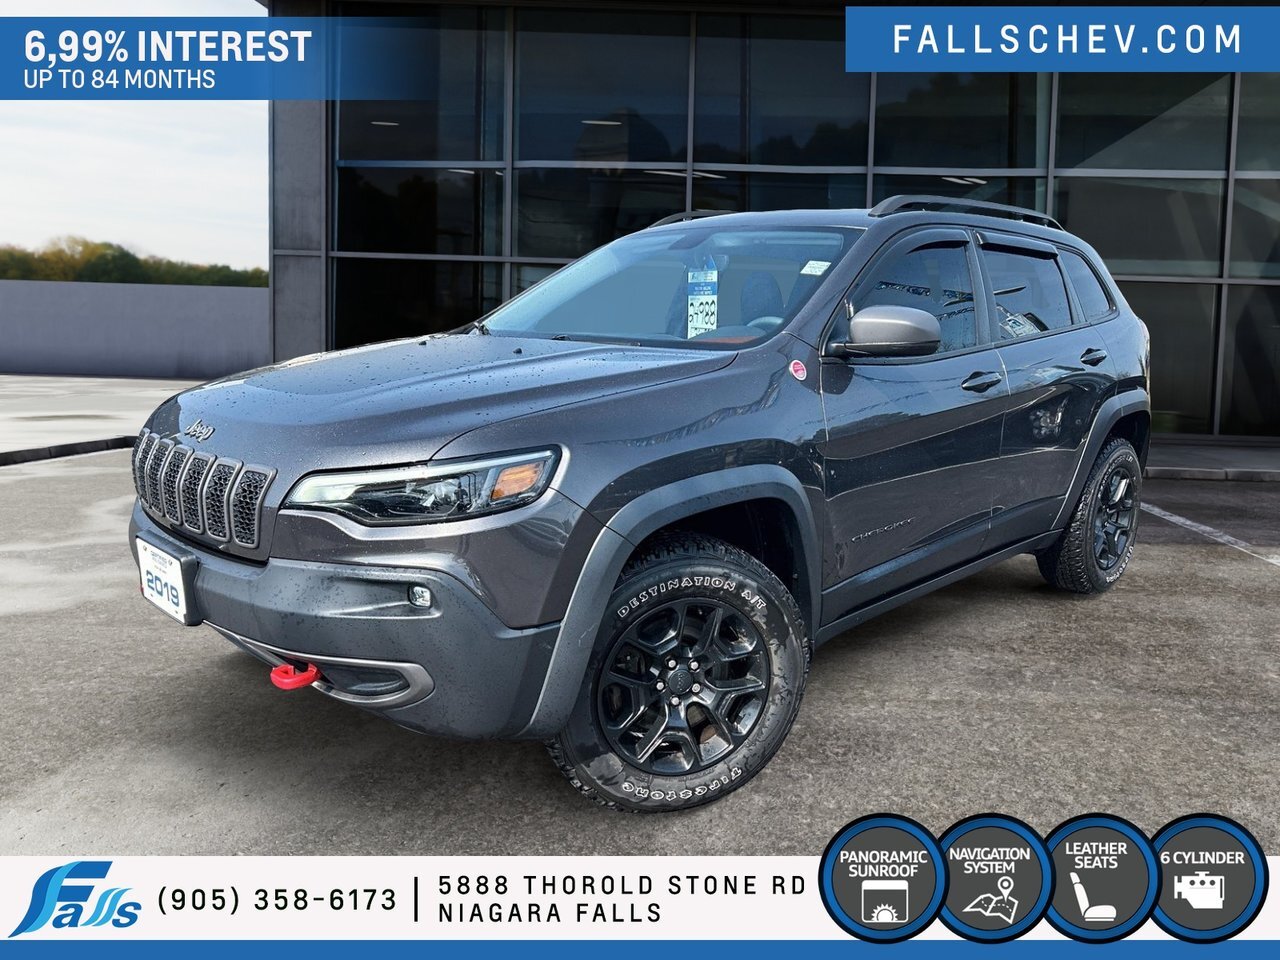 2019 Jeep Cherokee Trailhawk Elite LEATHER,V6,PANO ROOF,NAV,4X4